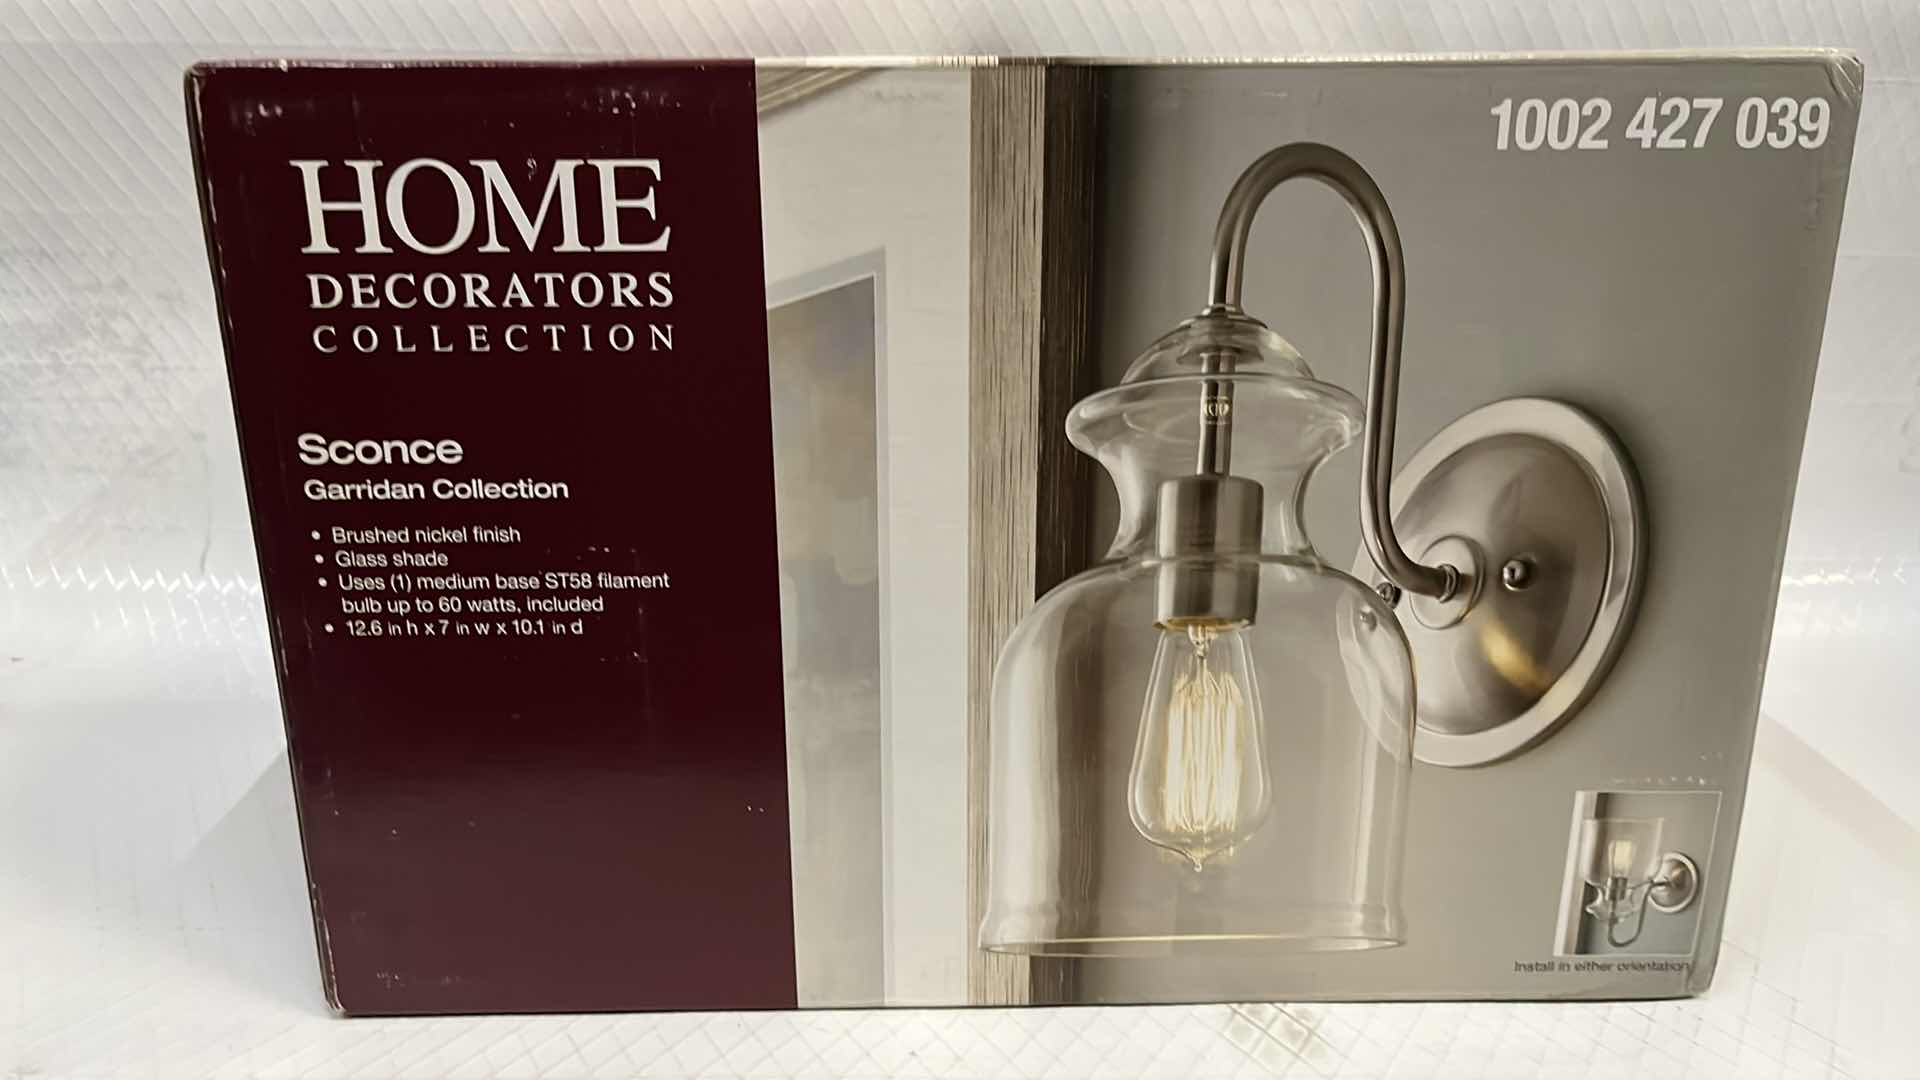 Photo 1 of NEW HOME DECORATORS COLLECTION GARRIDAN SCONCE, BRUSHED NICKEL FINISH W GLASS SHADE, 7” X 12.6”H (1002 427 039)